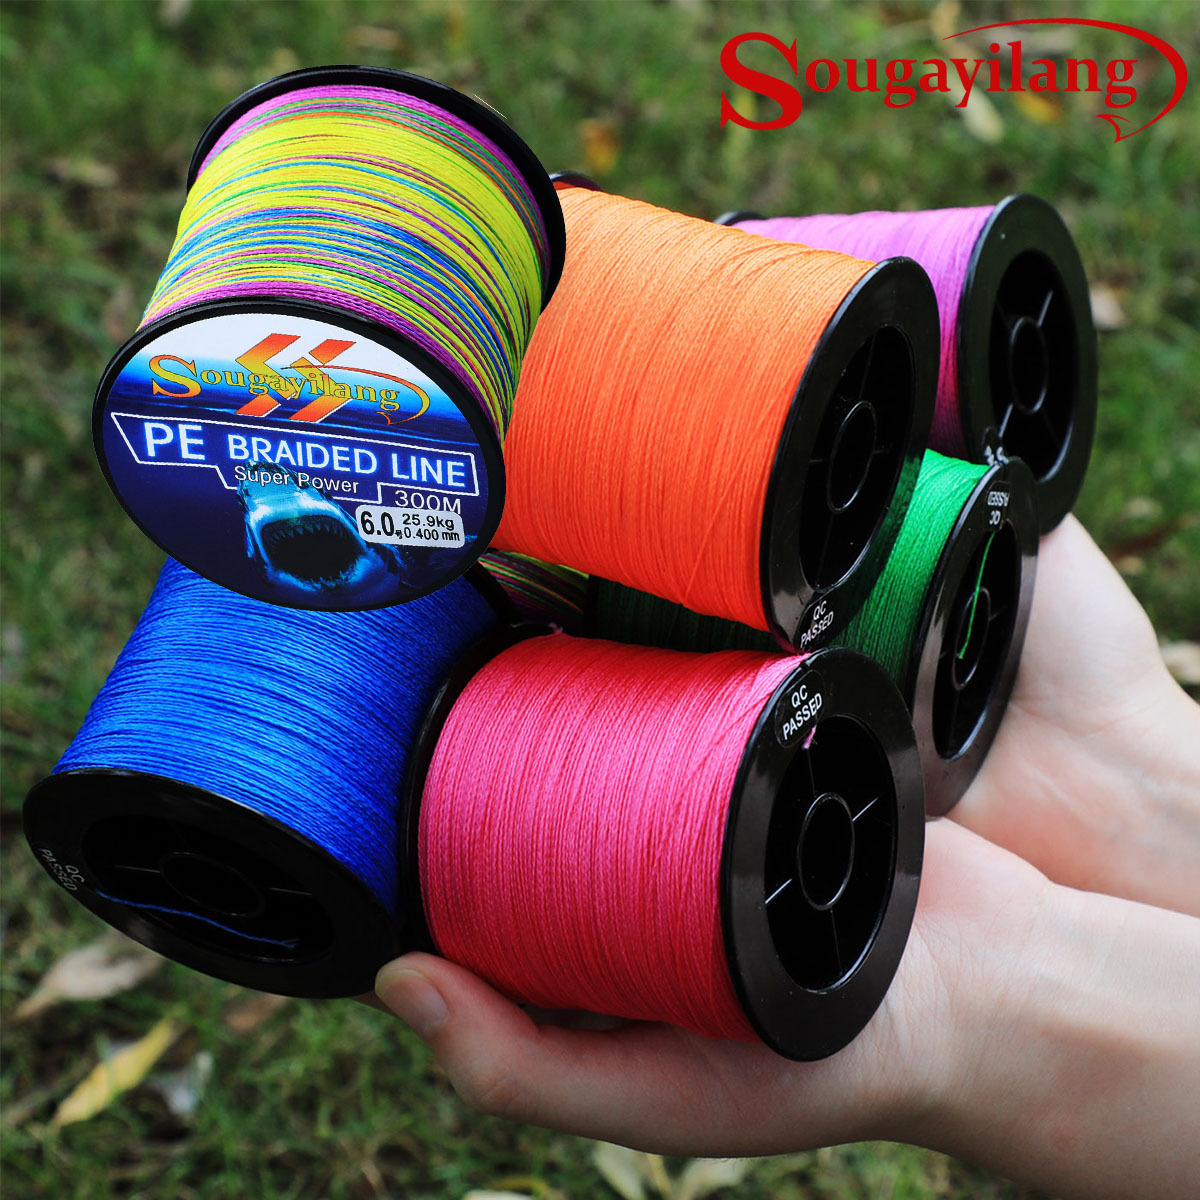 Sougayilang 8 Strands Braided Line 547yds Pe Fishing Line, Shop The Latest  Trends